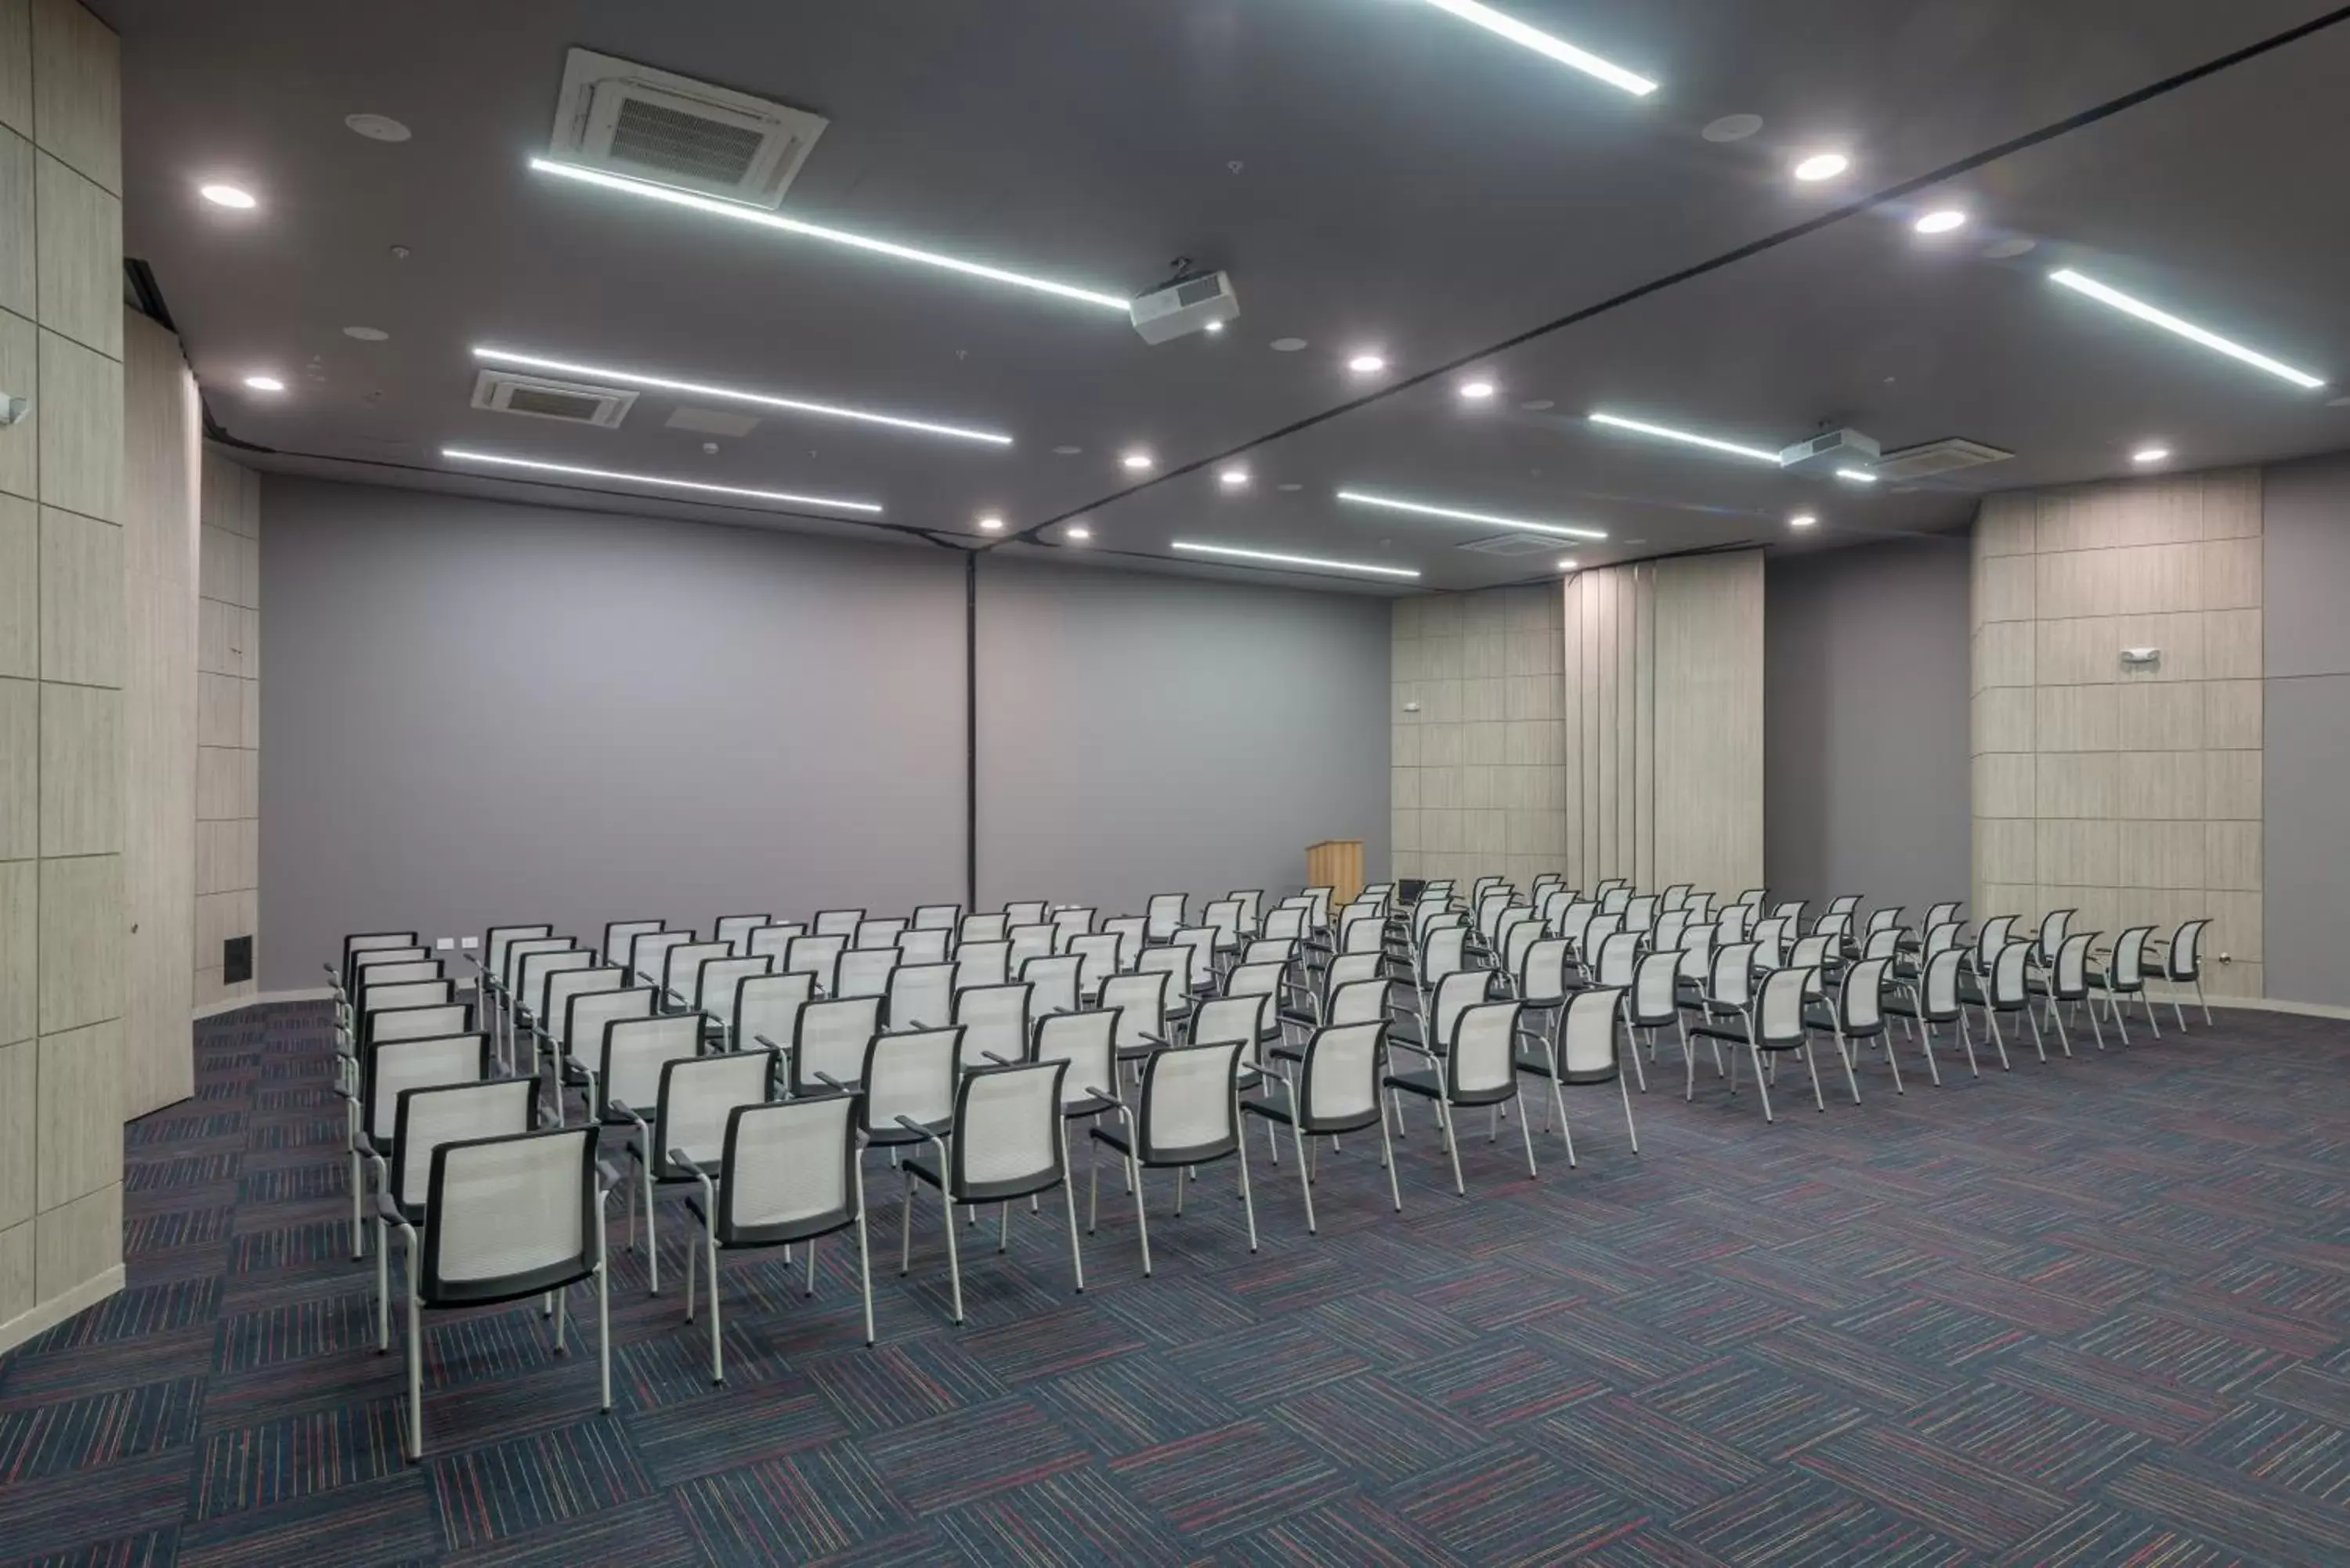 Meeting/conference room in Crowne Plaza Barranquilla, an IHG Hotel